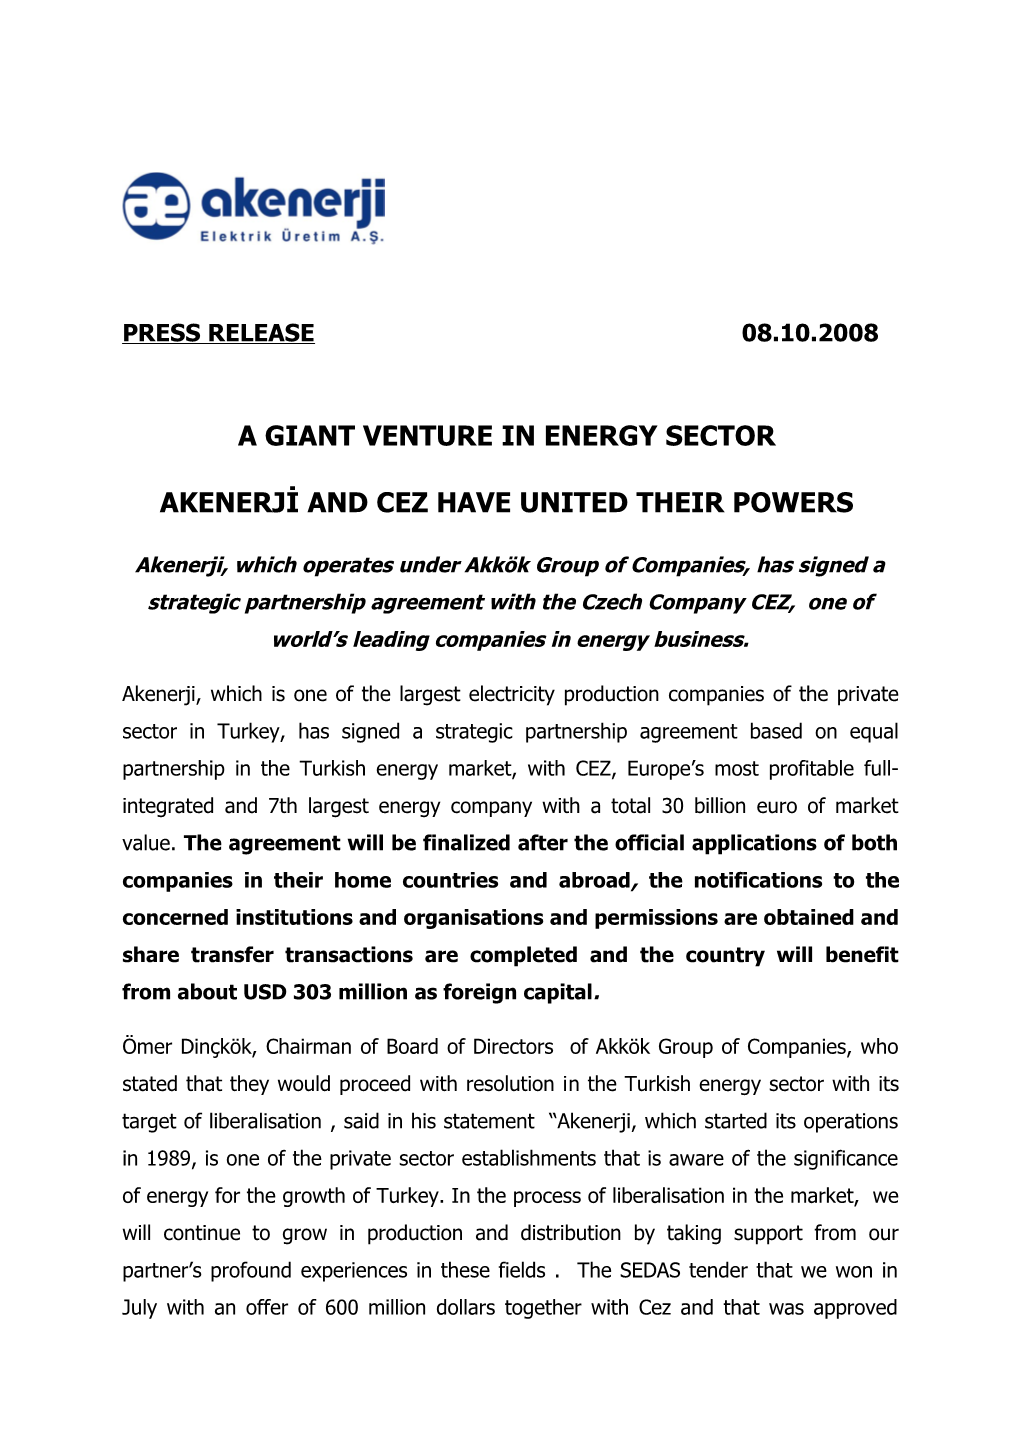 A Giant Venture in Energy Sector